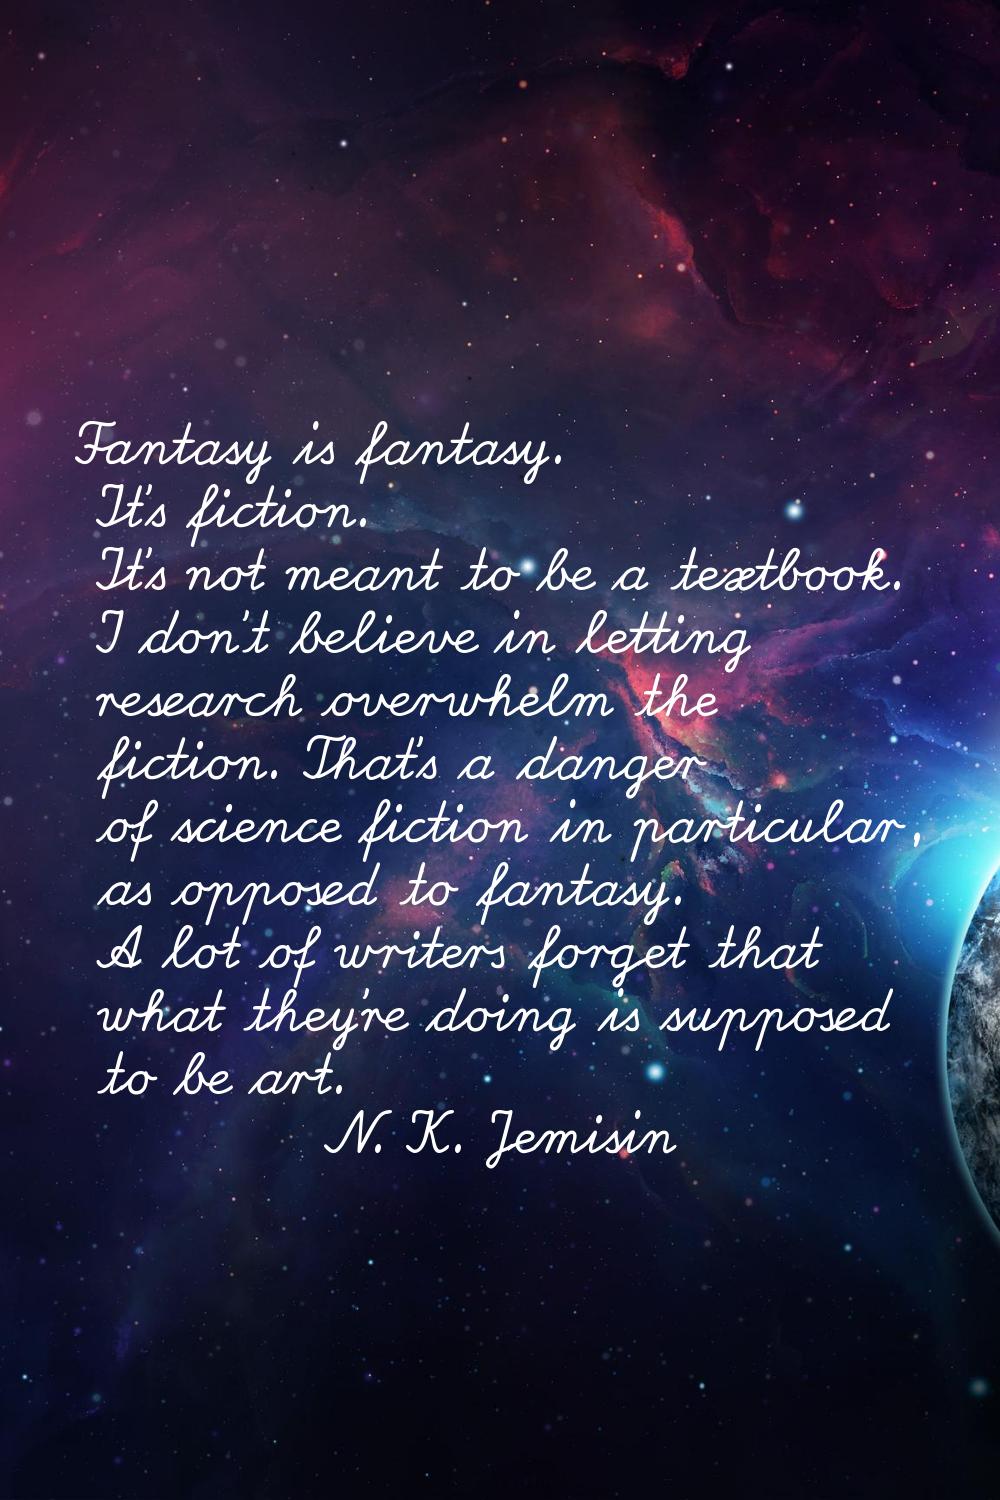 Fantasy is fantasy. It's fiction. It's not meant to be a textbook. I don't believe in letting resea